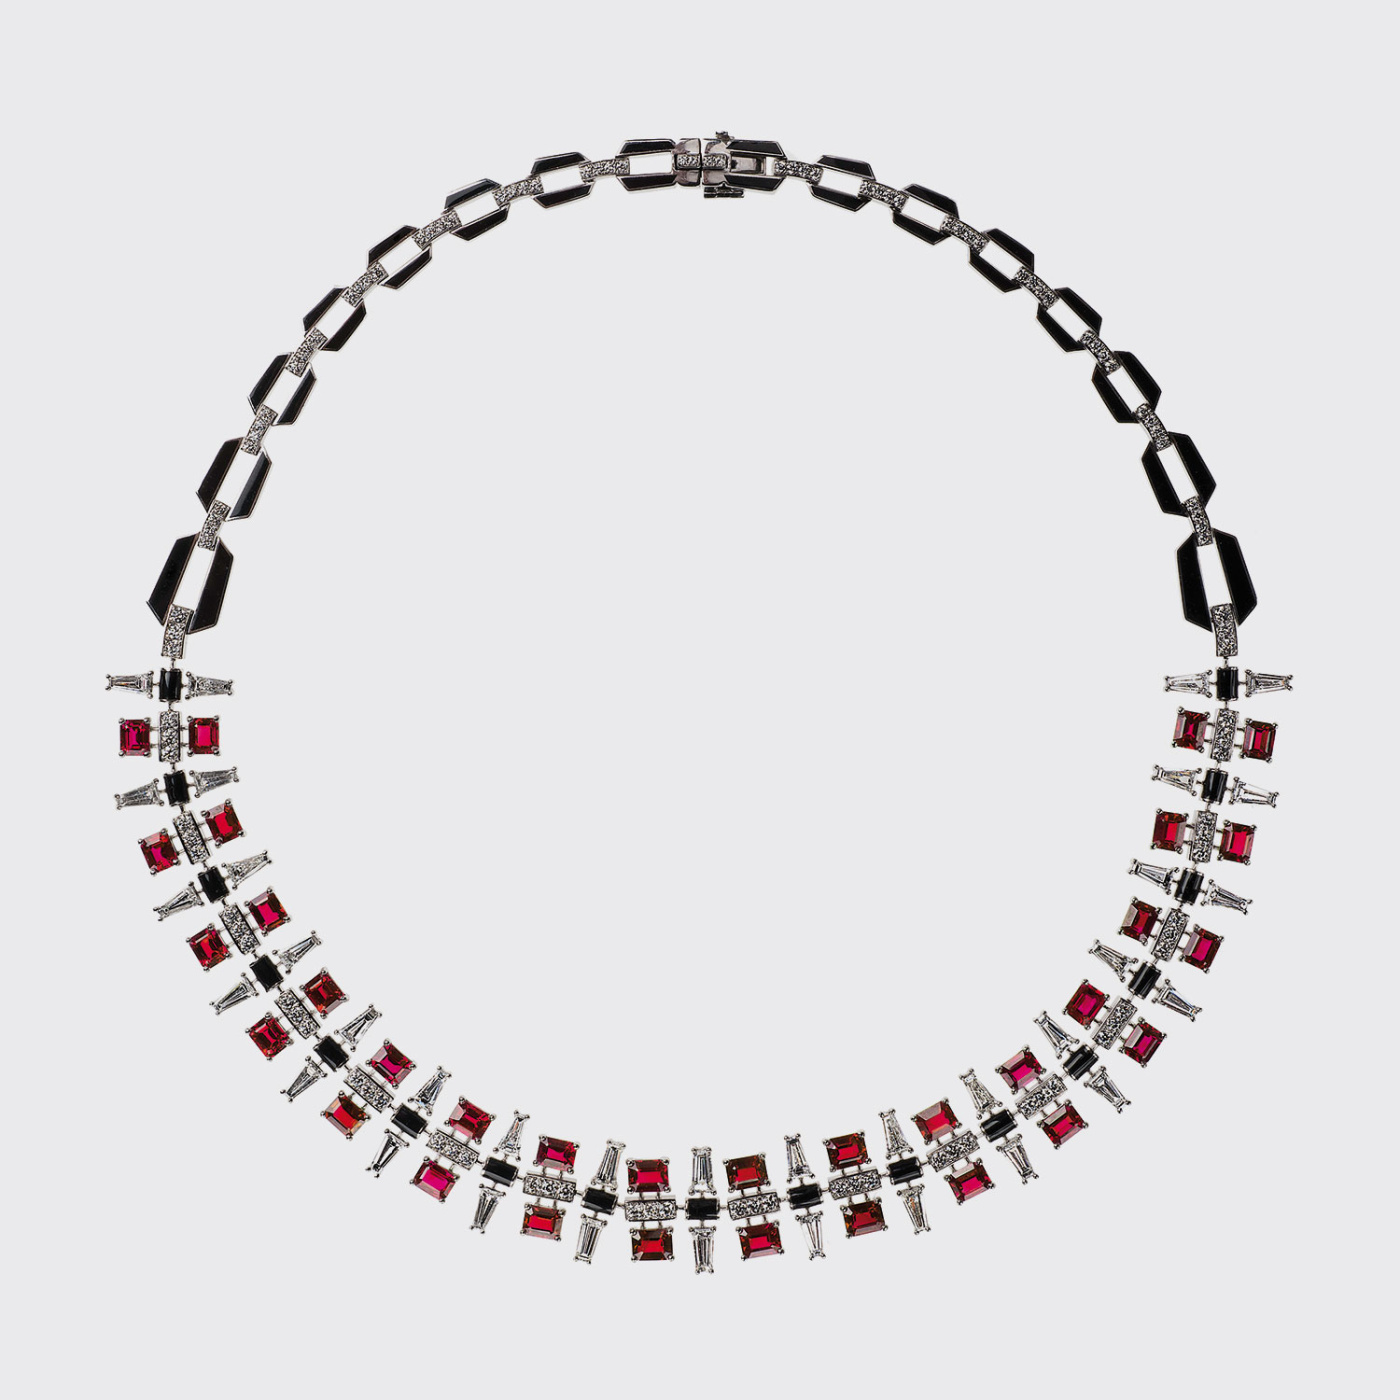 White gold necklace with rubies, white diamonds and black enamel